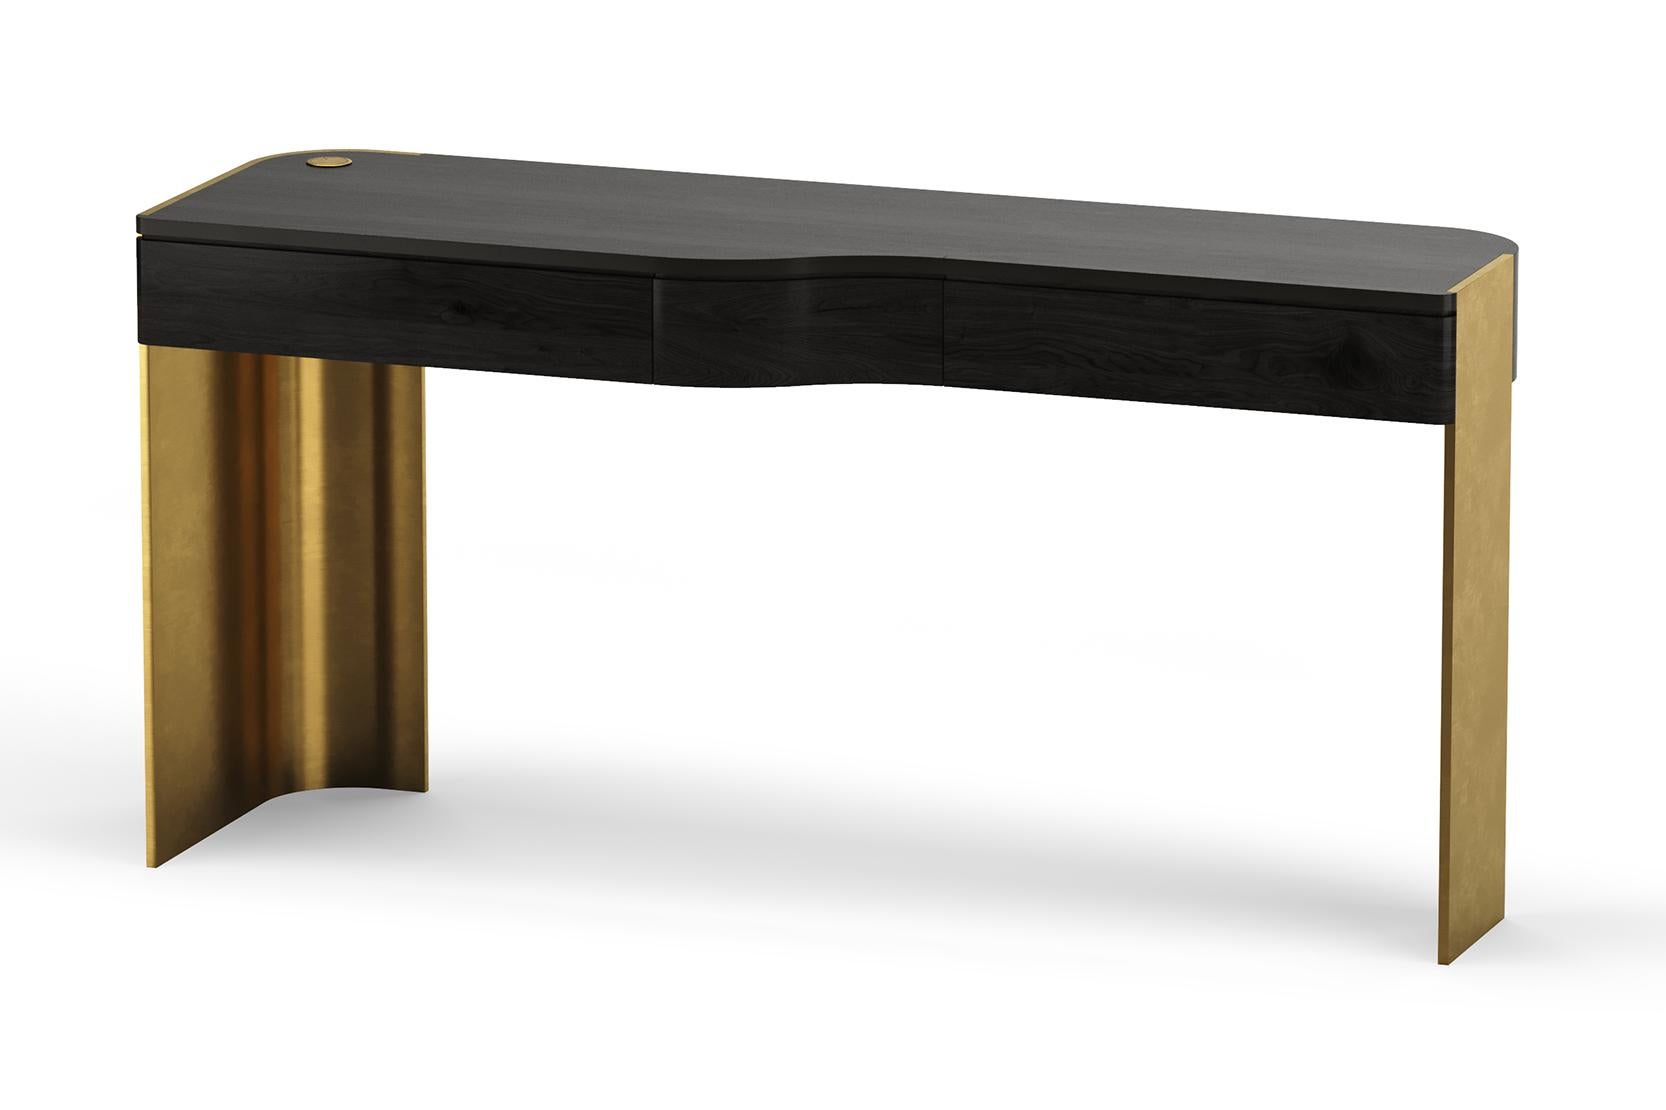 Izzy Desk, constructed with curved drawer modules, it combines the coolness of the asymmetrical metal base with the warmth of richly grained wood tabletop with built-in wireless charging & integrated power outlets. Custom sizes and finishes